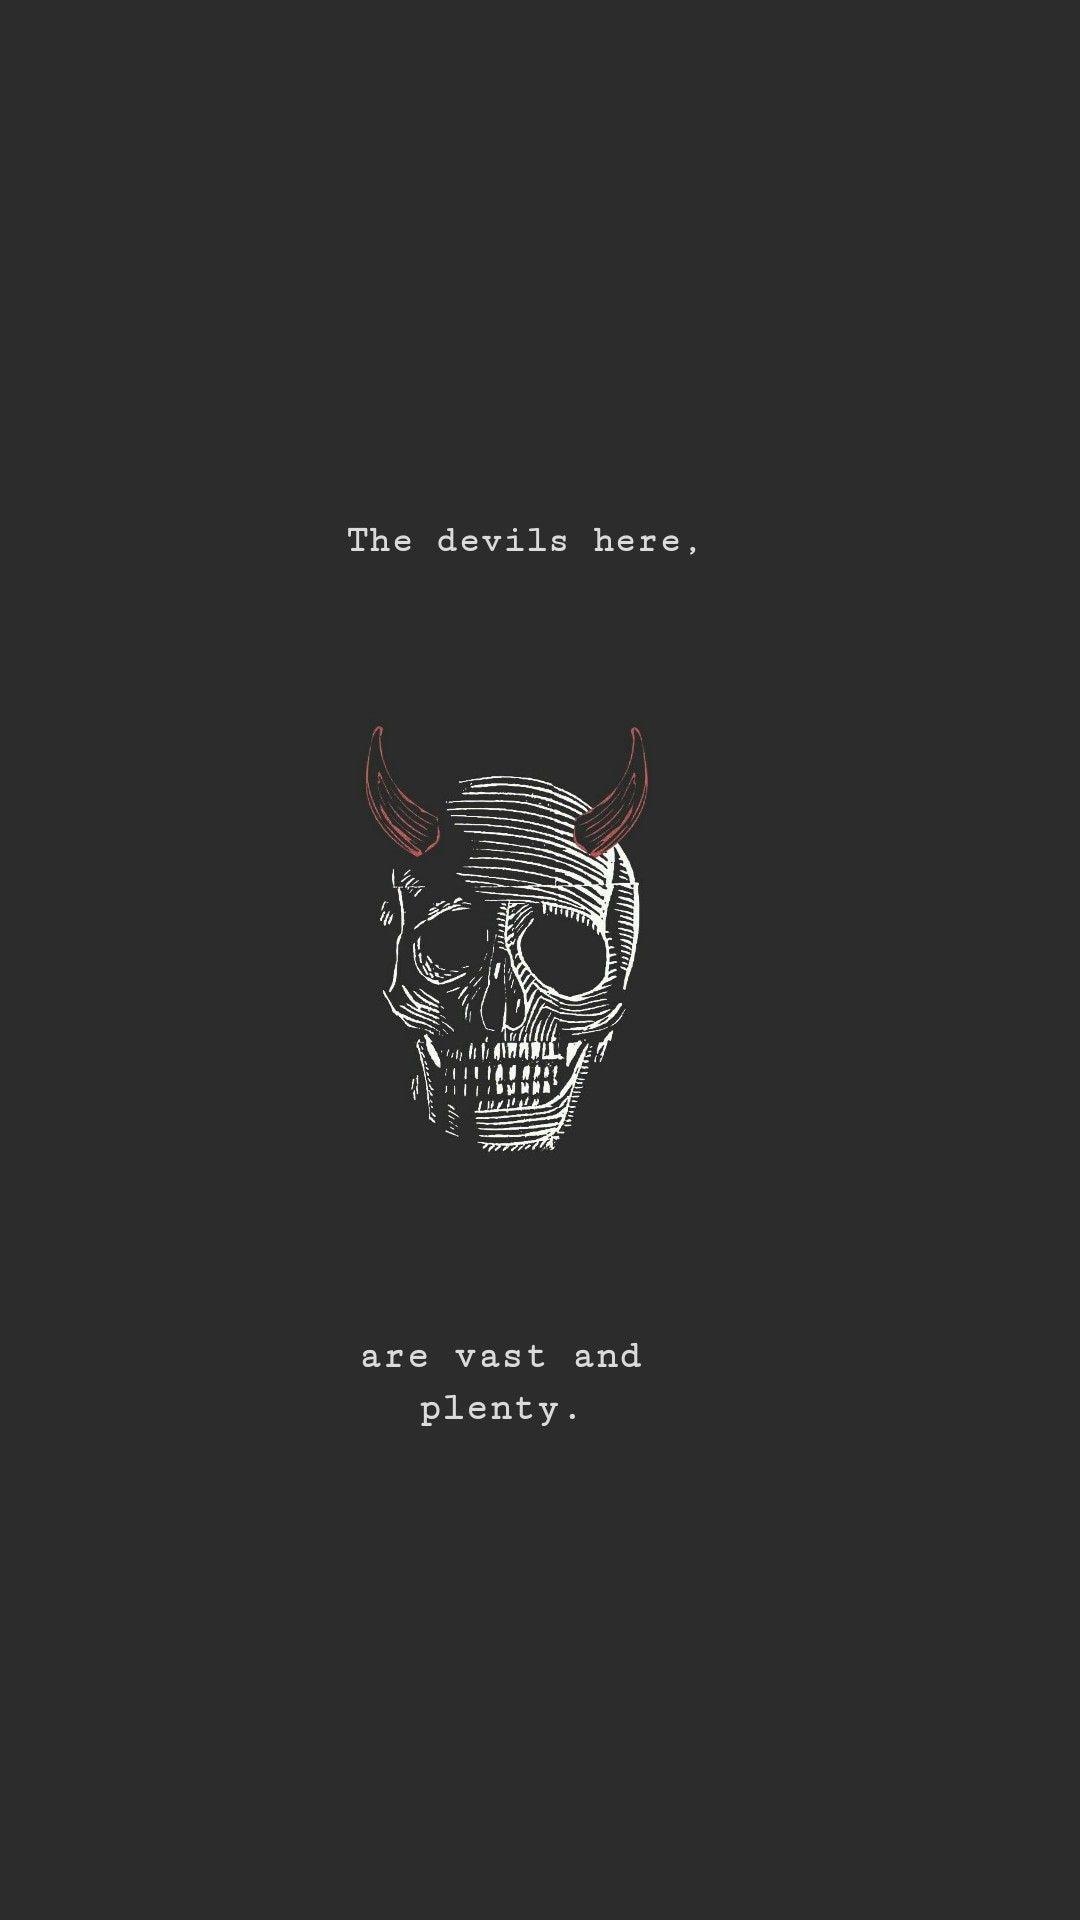 The devils here are vast and plenty #iphonewallpaper